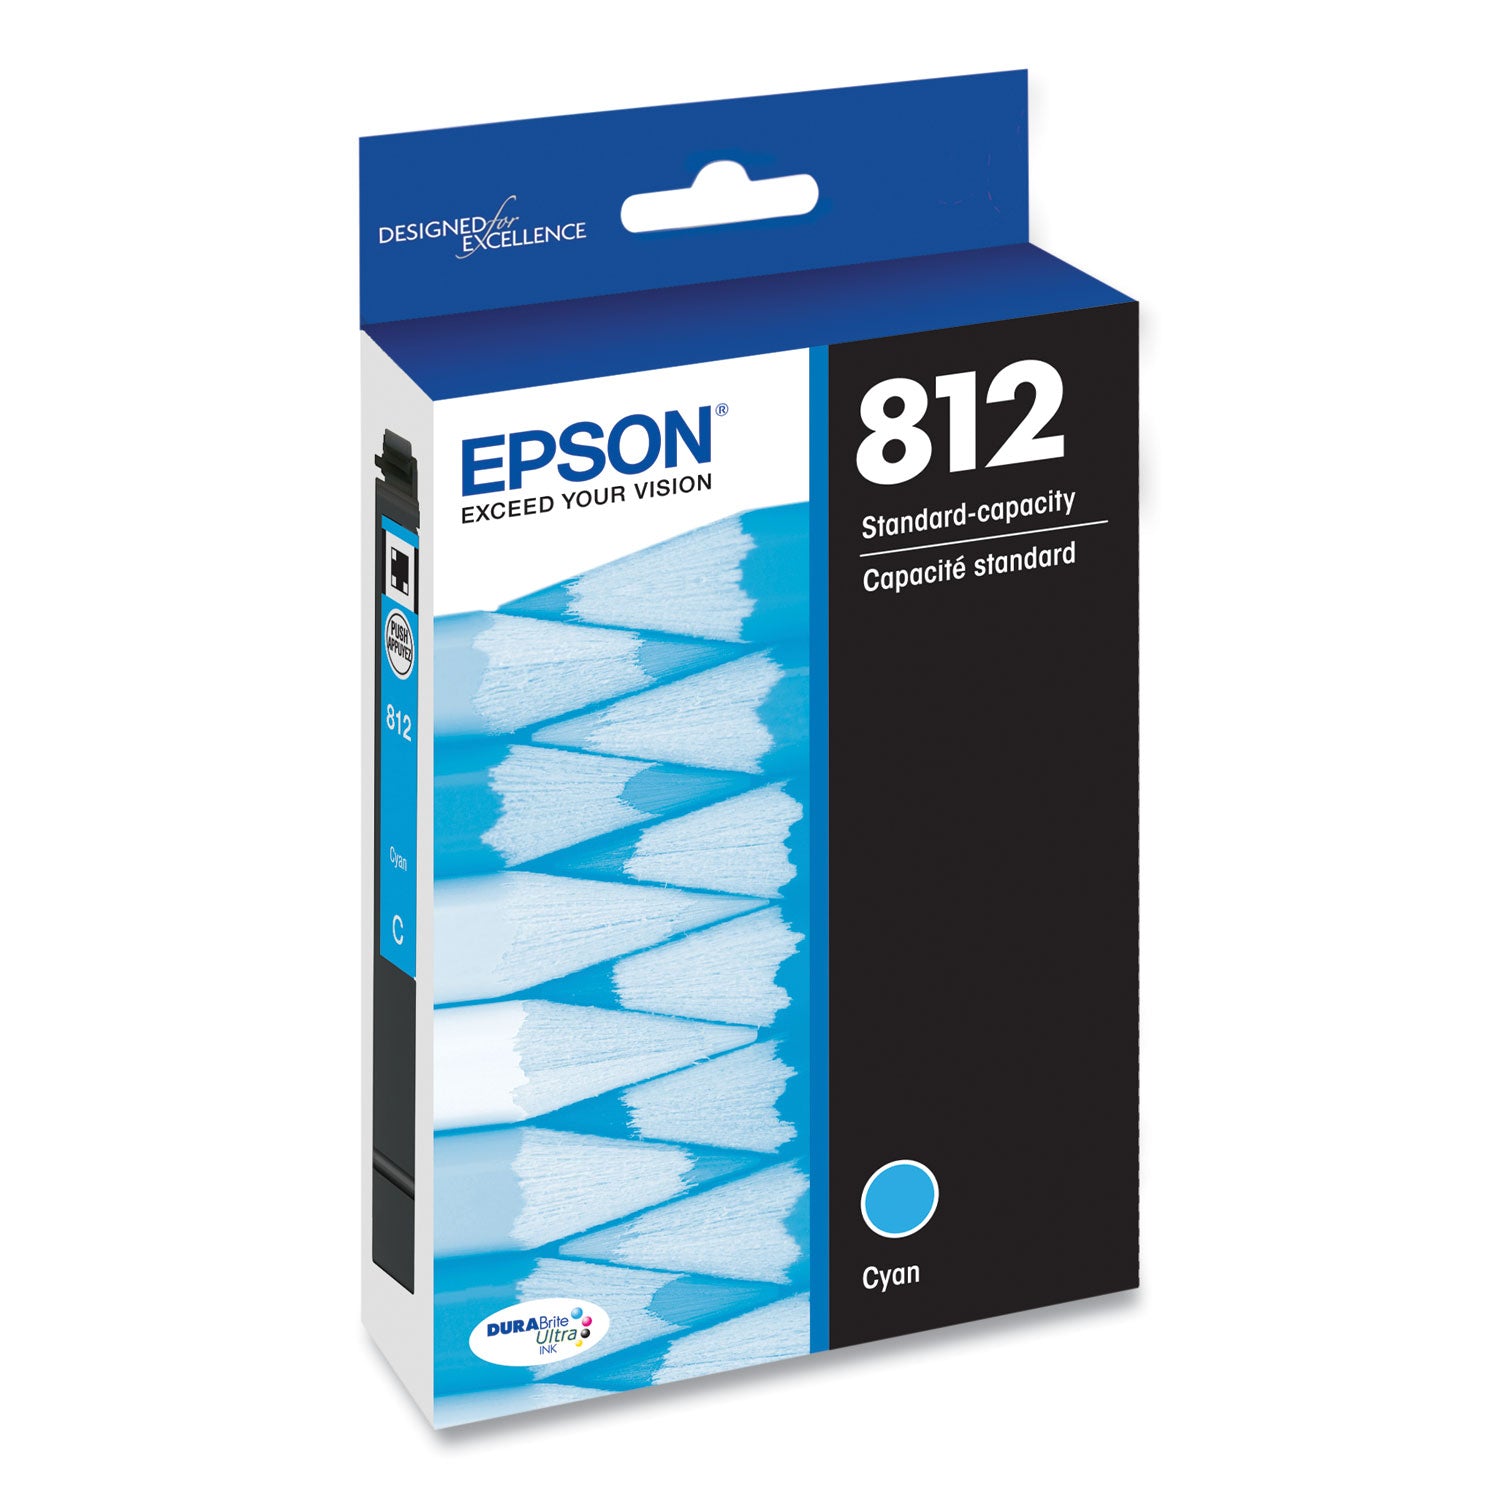 t812220-s-t812-durabrite-ultra-ink-300-page-yield-cyan_epst812220s - 2